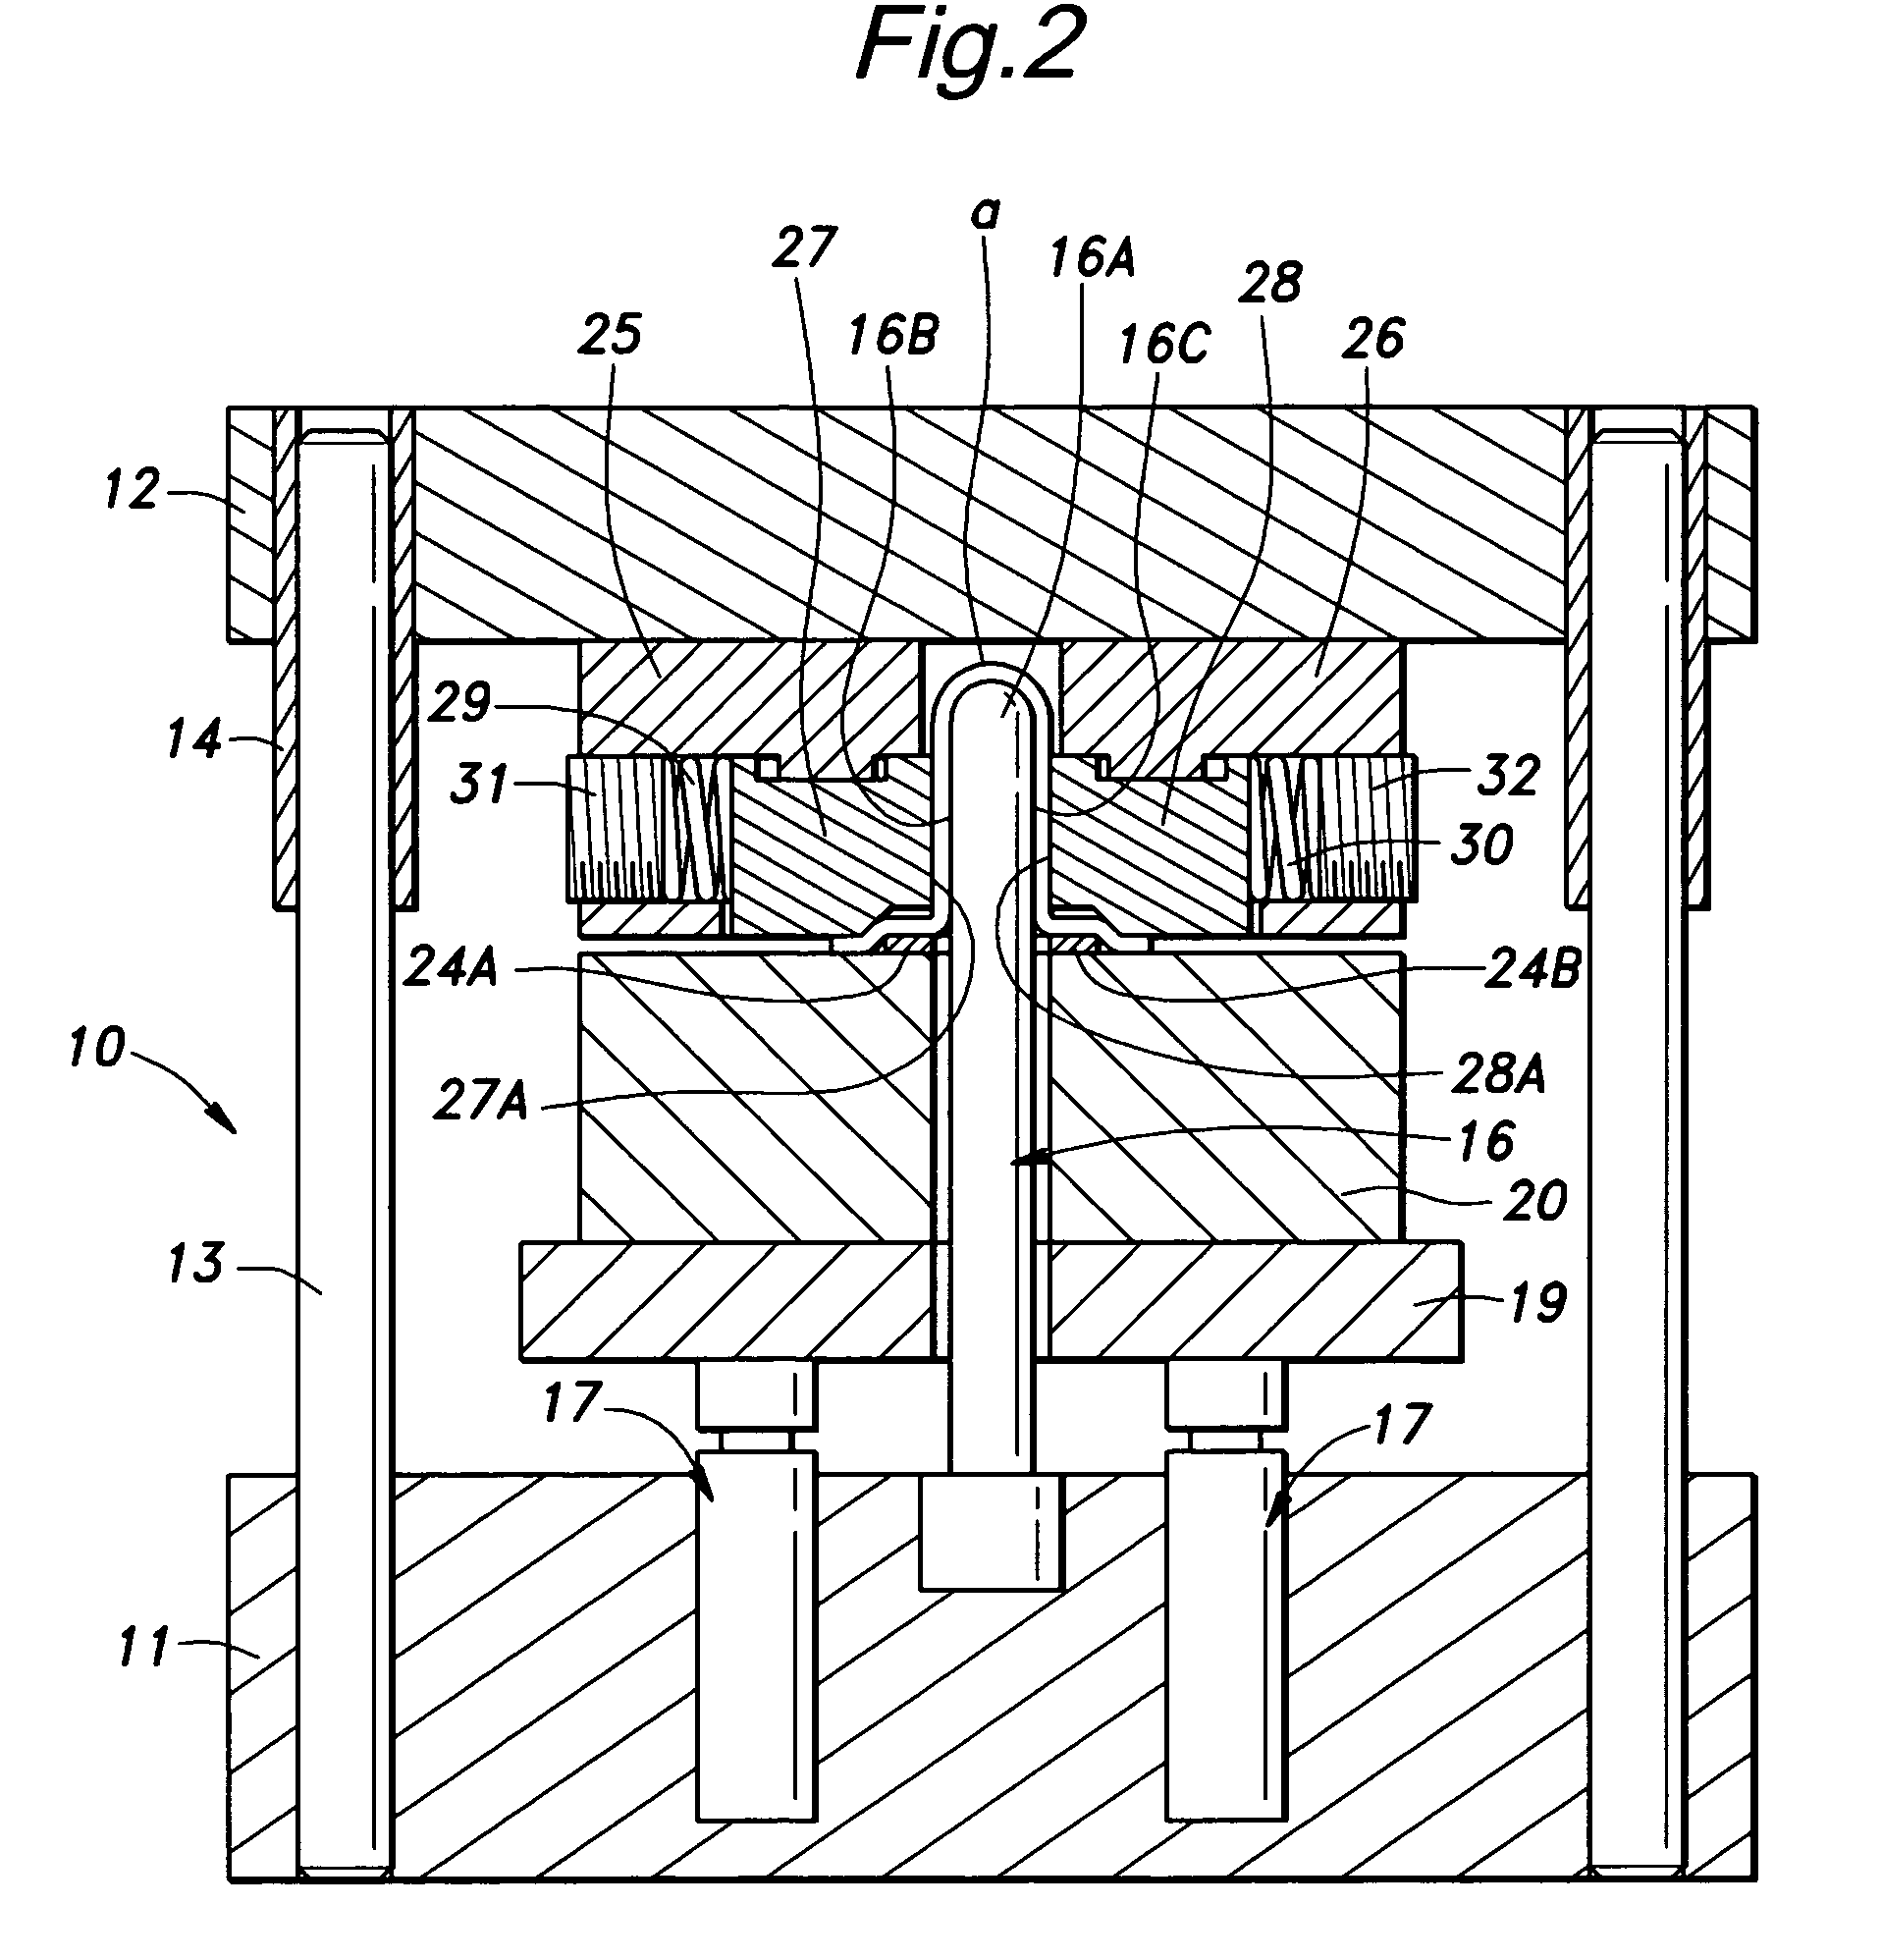 Method for manufacturing an edge protector and die assemblies therefor